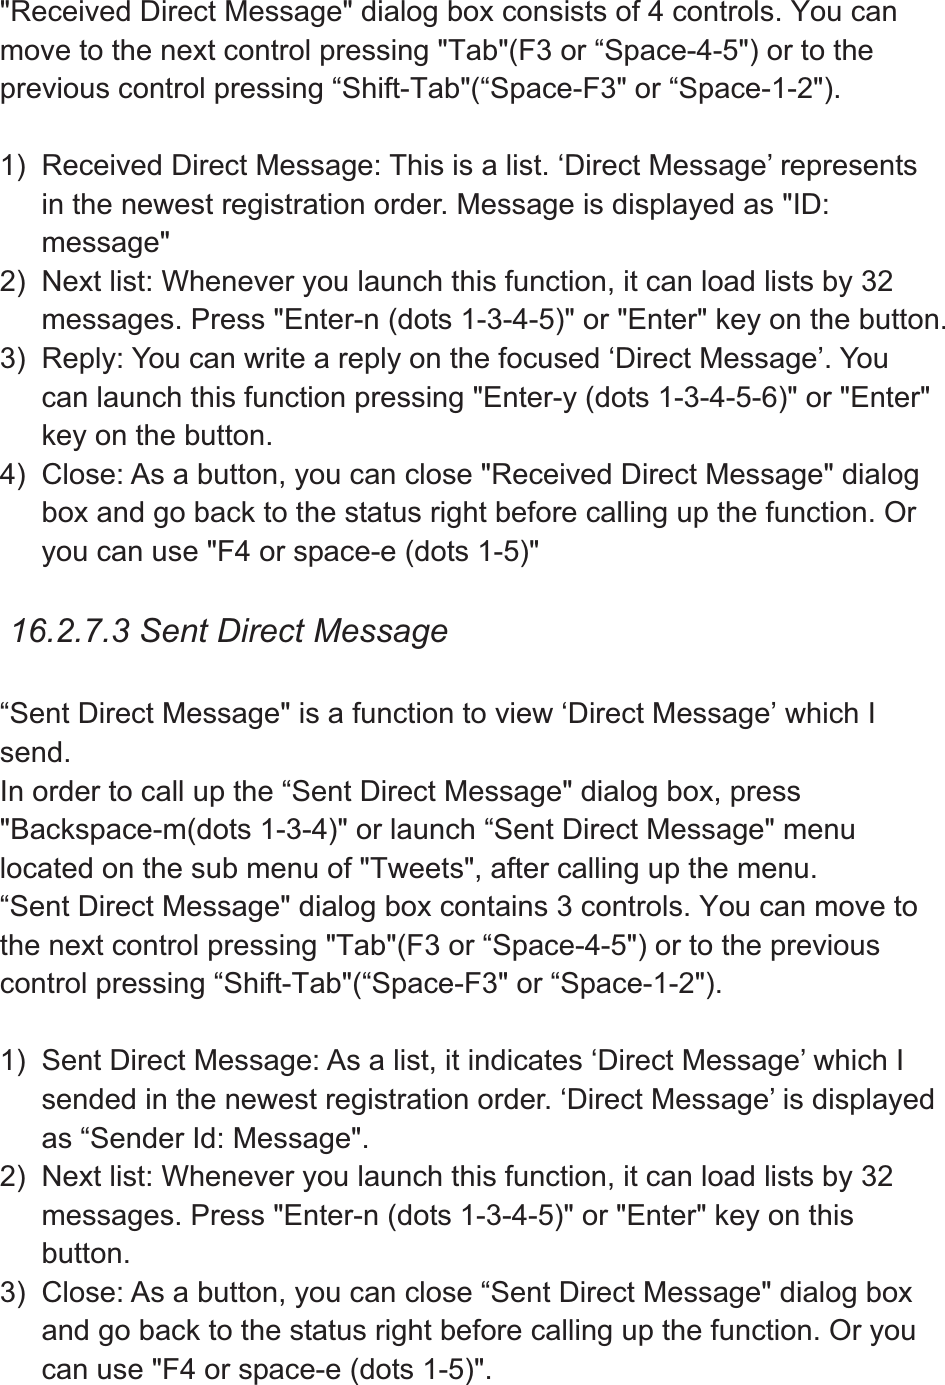 &quot;Received Direct Message&quot; dialog box consists of 4 controls. You can move to the next control pressing &quot;Tab&quot;(F3 or “Space-4-5&quot;) or to the previous control pressing “Shift-Tab&quot;(“Space-F3&quot; or “Space-1-2&quot;).   1)  Received Direct Message: This is a list. ‘Direct Message’ represents in the newest registration order. Message is displayed as &quot;ID: message&quot;2)  Next list: Whenever you launch this function, it can load lists by 32 messages. Press &quot;Enter-n (dots 1-3-4-5)&quot; or &quot;Enter&quot; key on the button. 3)  Reply: You can write a reply on the focused ‘Direct Message’. You can launch this function pressing &quot;Enter-y (dots 1-3-4-5-6)&quot; or &quot;Enter&quot; key on the button. 4)  Close: As a button, you can close &quot;Received Direct Message&quot; dialog box and go back to the status right before calling up the function. Or you can use &quot;F4 or space-e (dots 1-5)&quot;   16.2.7.3 Sent Direct Message “Sent Direct Message&quot; is a function to view ‘Direct Message’ which I send.In order to call up the “Sent Direct Message&quot; dialog box, press &quot;Backspace-m(dots 1-3-4)&quot; or launch “Sent Direct Message&quot; menu located on the sub menu of &quot;Tweets&quot;, after calling up the menu.   “Sent Direct Message&quot; dialog box contains 3 controls. You can move to the next control pressing &quot;Tab&quot;(F3 or “Space-4-5&quot;) or to the previous control pressing “Shift-Tab&quot;(“Space-F3&quot; or “Space-1-2&quot;). 1)  Sent Direct Message: As a list, it indicates ‘Direct Message’ which I sended in the newest registration order. ‘Direct Message’ is displayed as “Sender Id: Message&quot;. 2)  Next list: Whenever you launch this function, it can load lists by 32 messages. Press &quot;Enter-n (dots 1-3-4-5)&quot; or &quot;Enter&quot; key on this button.3)  Close: As a button, you can close “Sent Direct Message&quot; dialog box and go back to the status right before calling up the function. Or you can use &quot;F4 or space-e (dots 1-5)&quot;.   